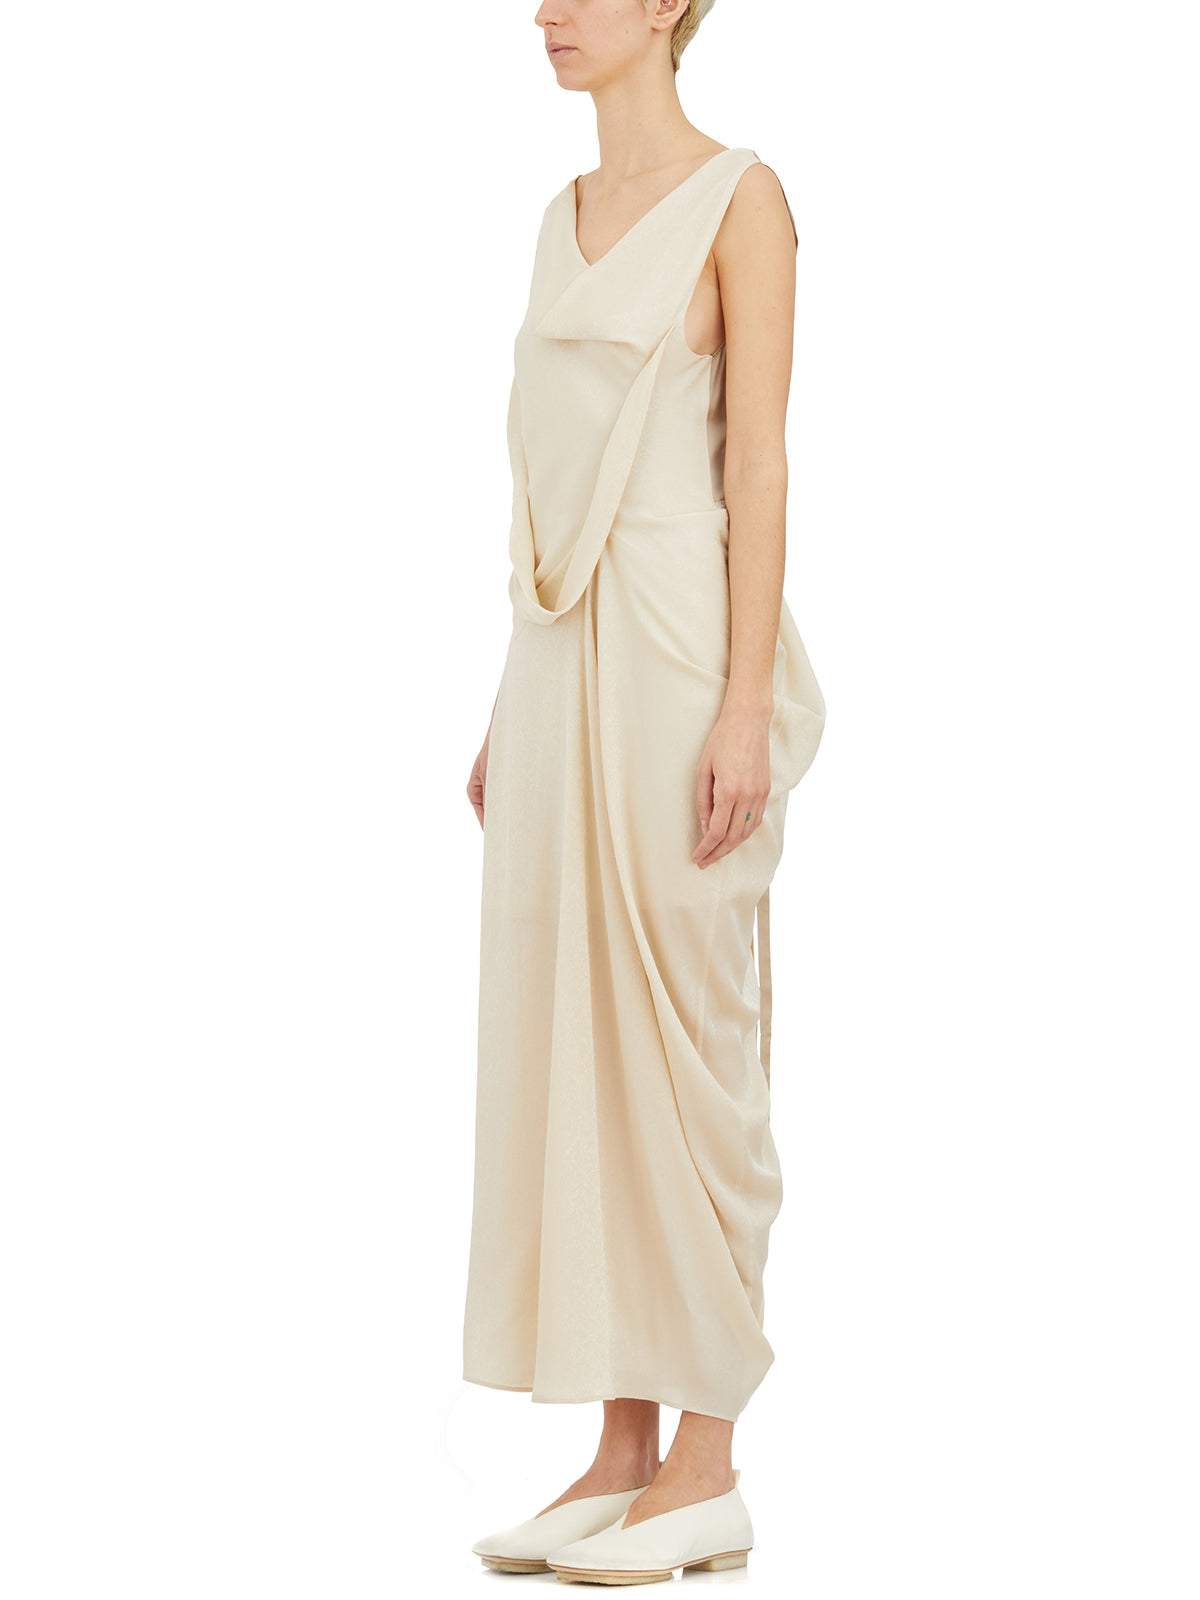 YEHUAFAN Tan Long Silk Dress with Floral Design and Lace-up Closure